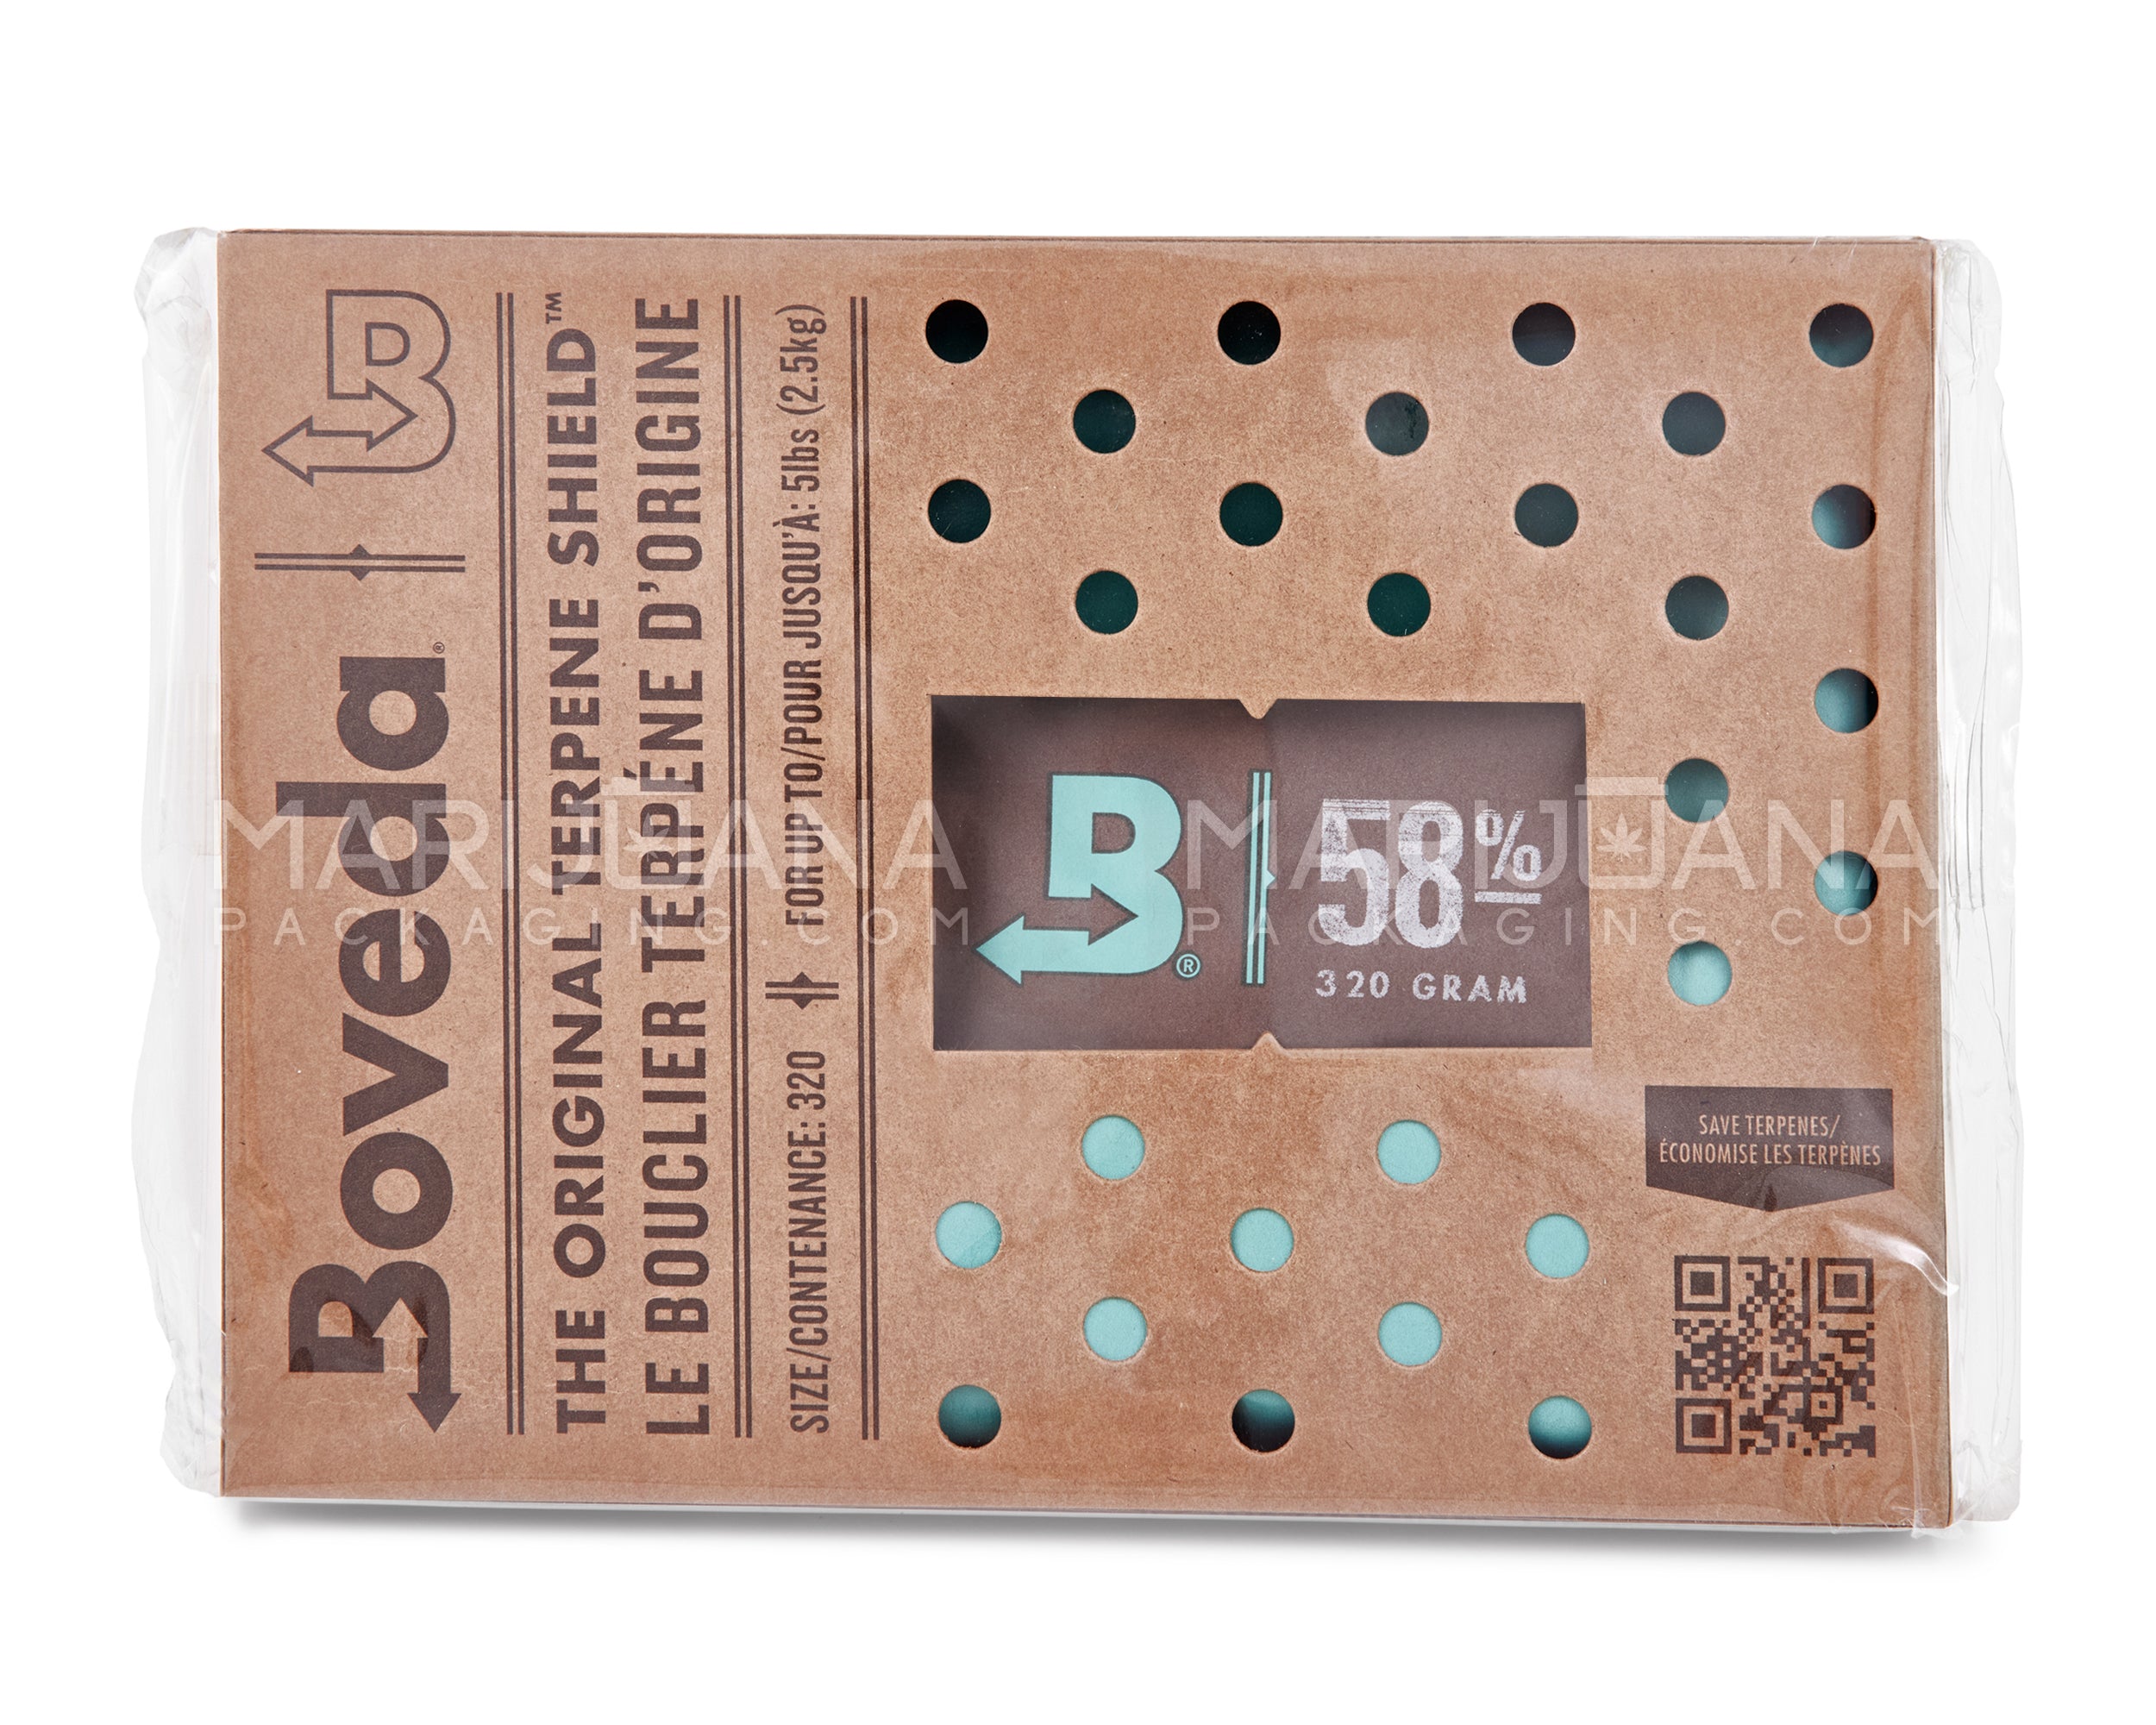 BOVEDA | Humidity Control Packs | 320 Grams - 58% - 6 Count - 3